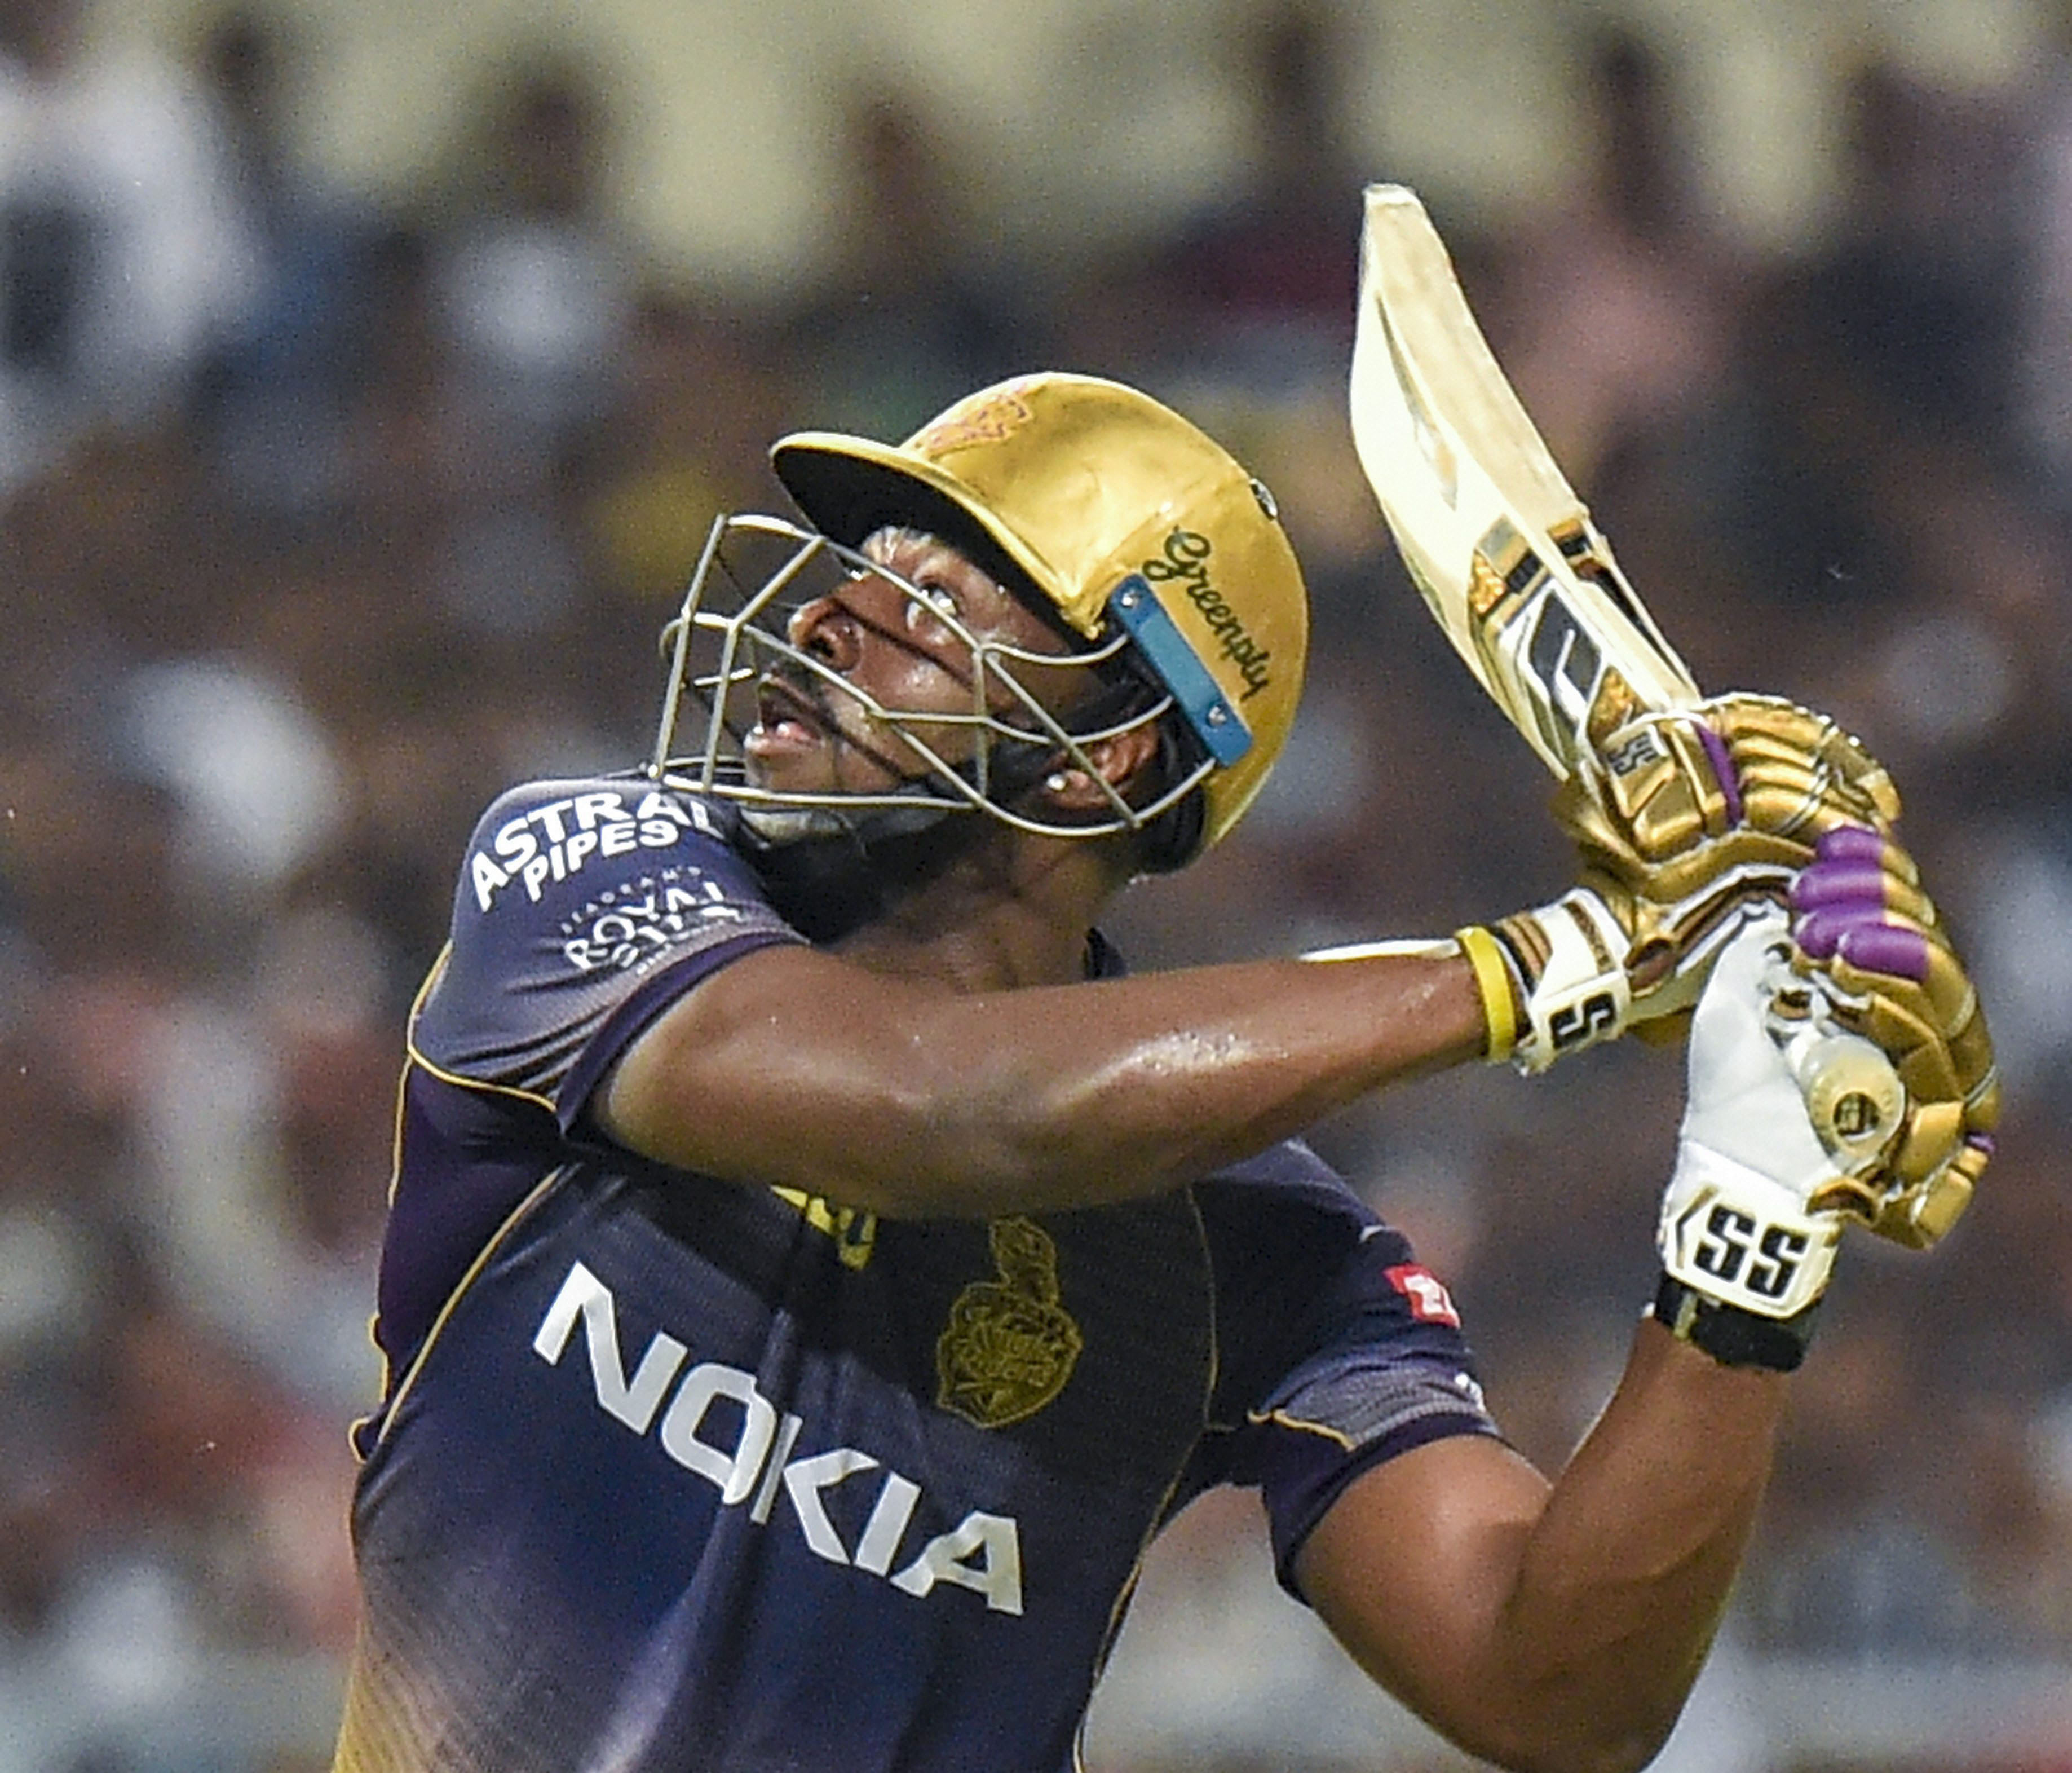 KKR batsman Andre Russell plays a shot during the Indian Premier League 2019 match between Delhi Capitals and Kolkata Knight Riders at Eden Garden in Calcutta on Friday. April 12,2019.